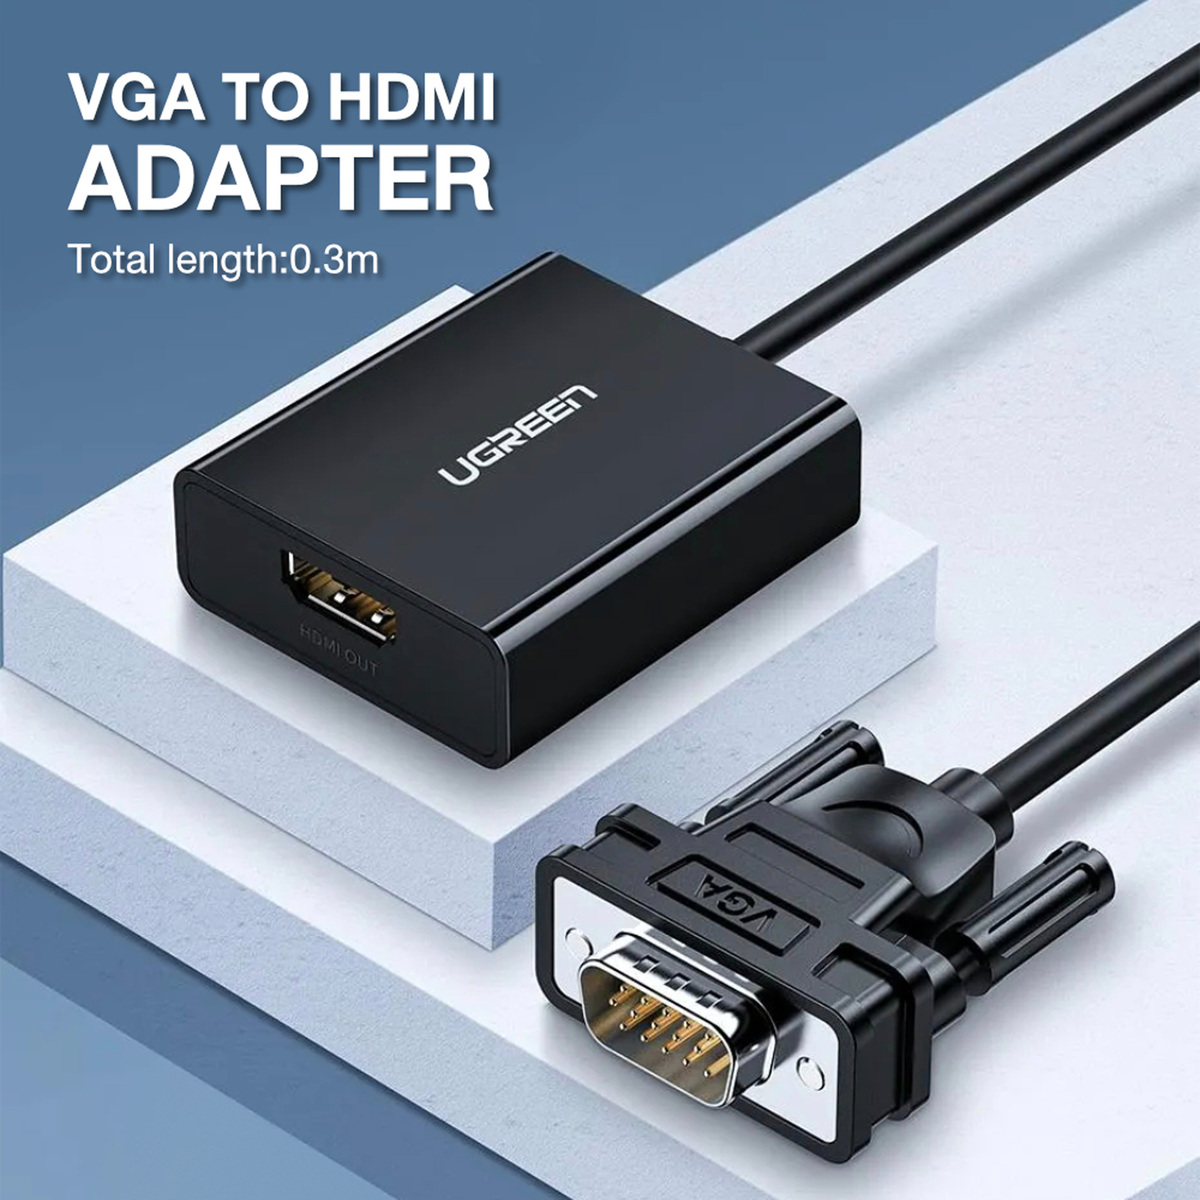 Ugreen VGA to HDMI Adapter with Audio, 50945